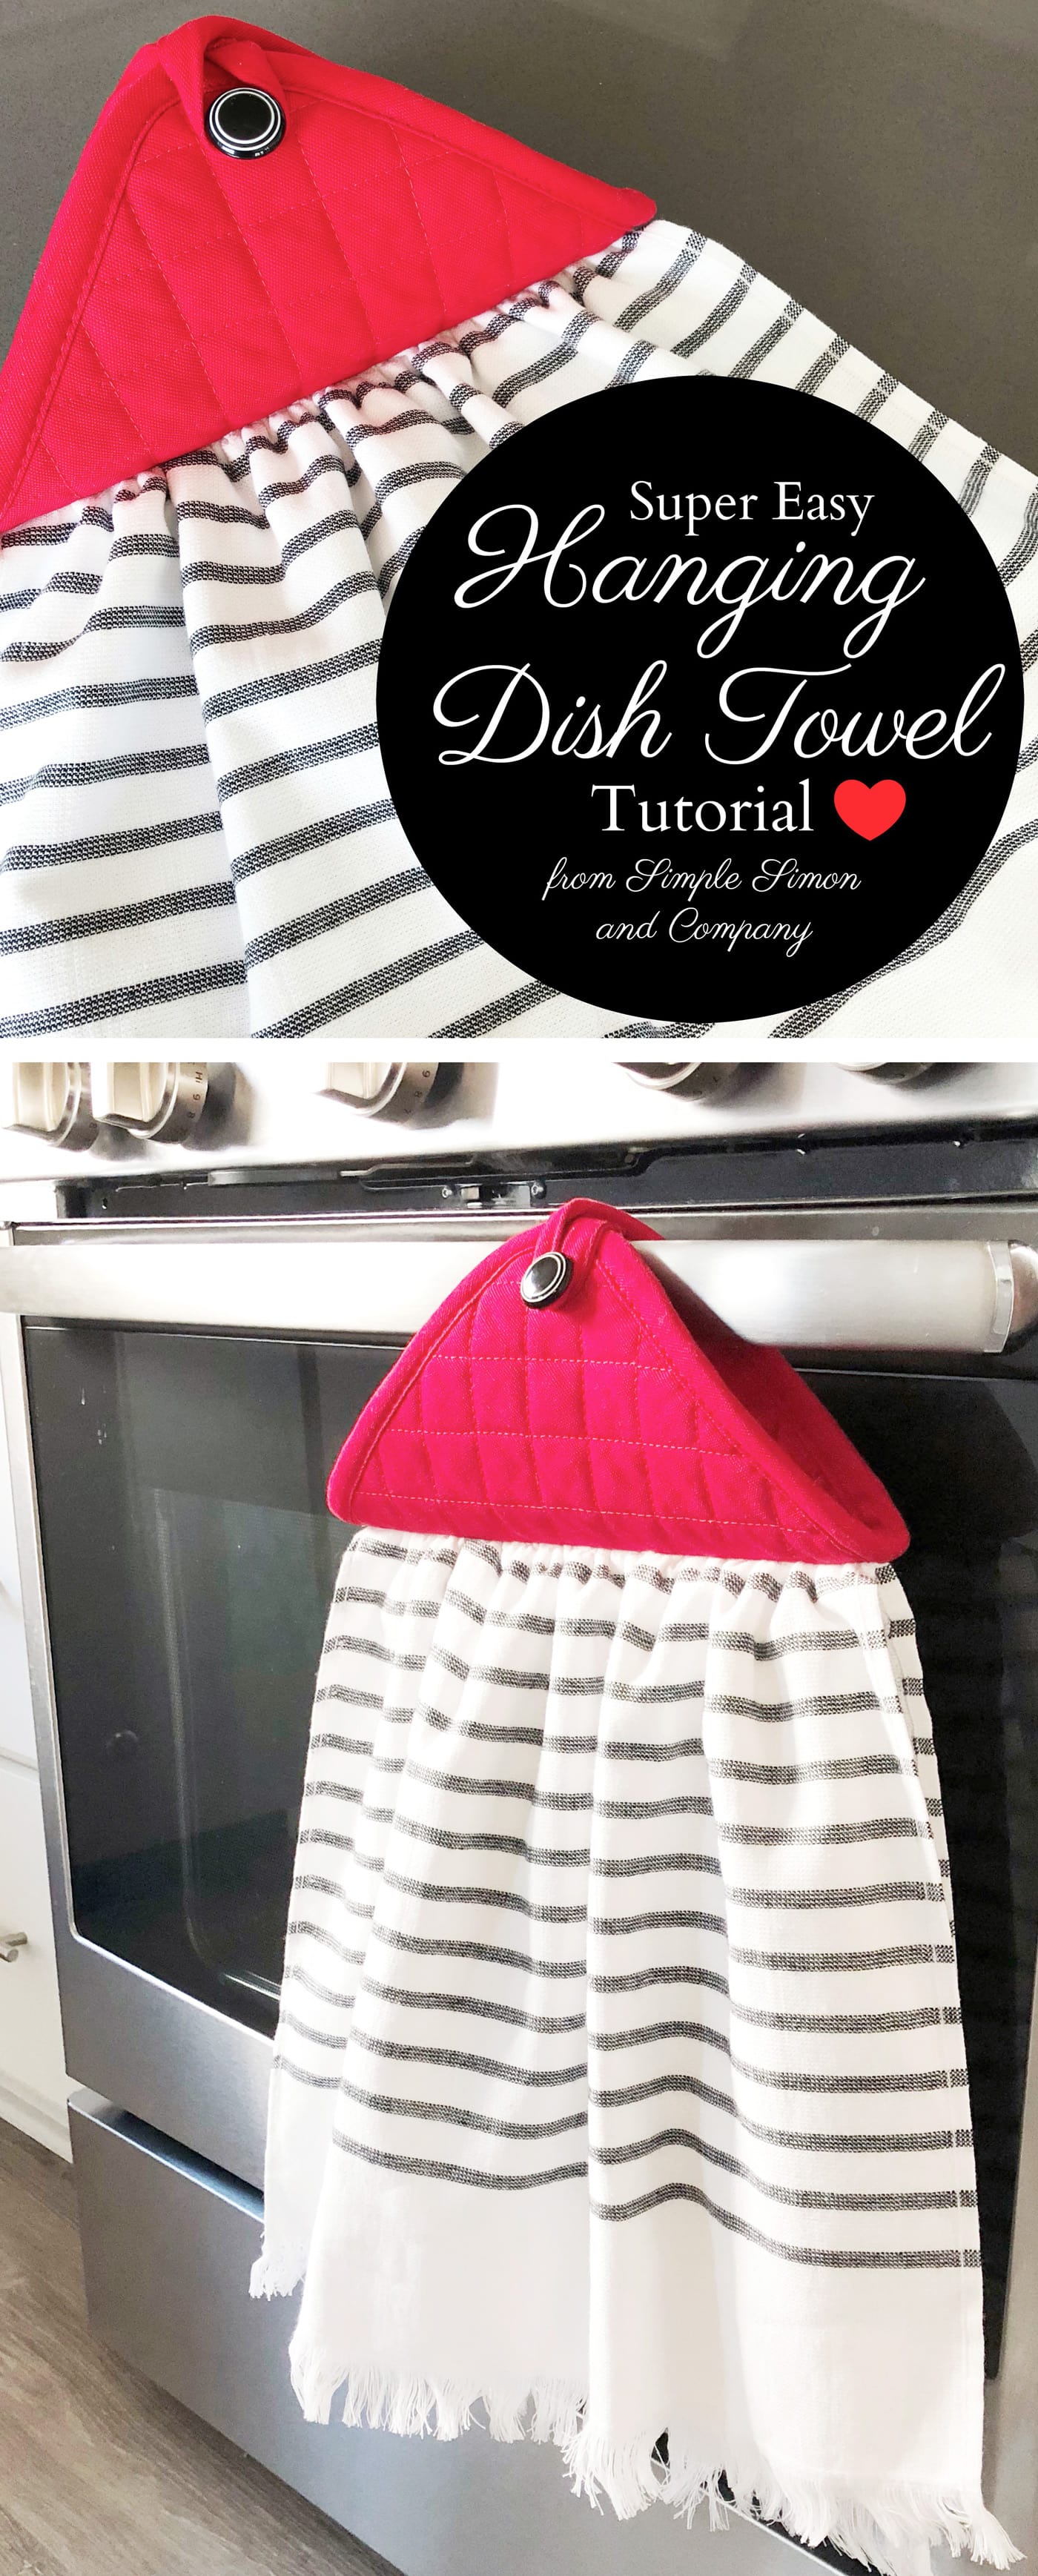 How to Make an EASY Hanging Dish Towel - Simple Simon and Company